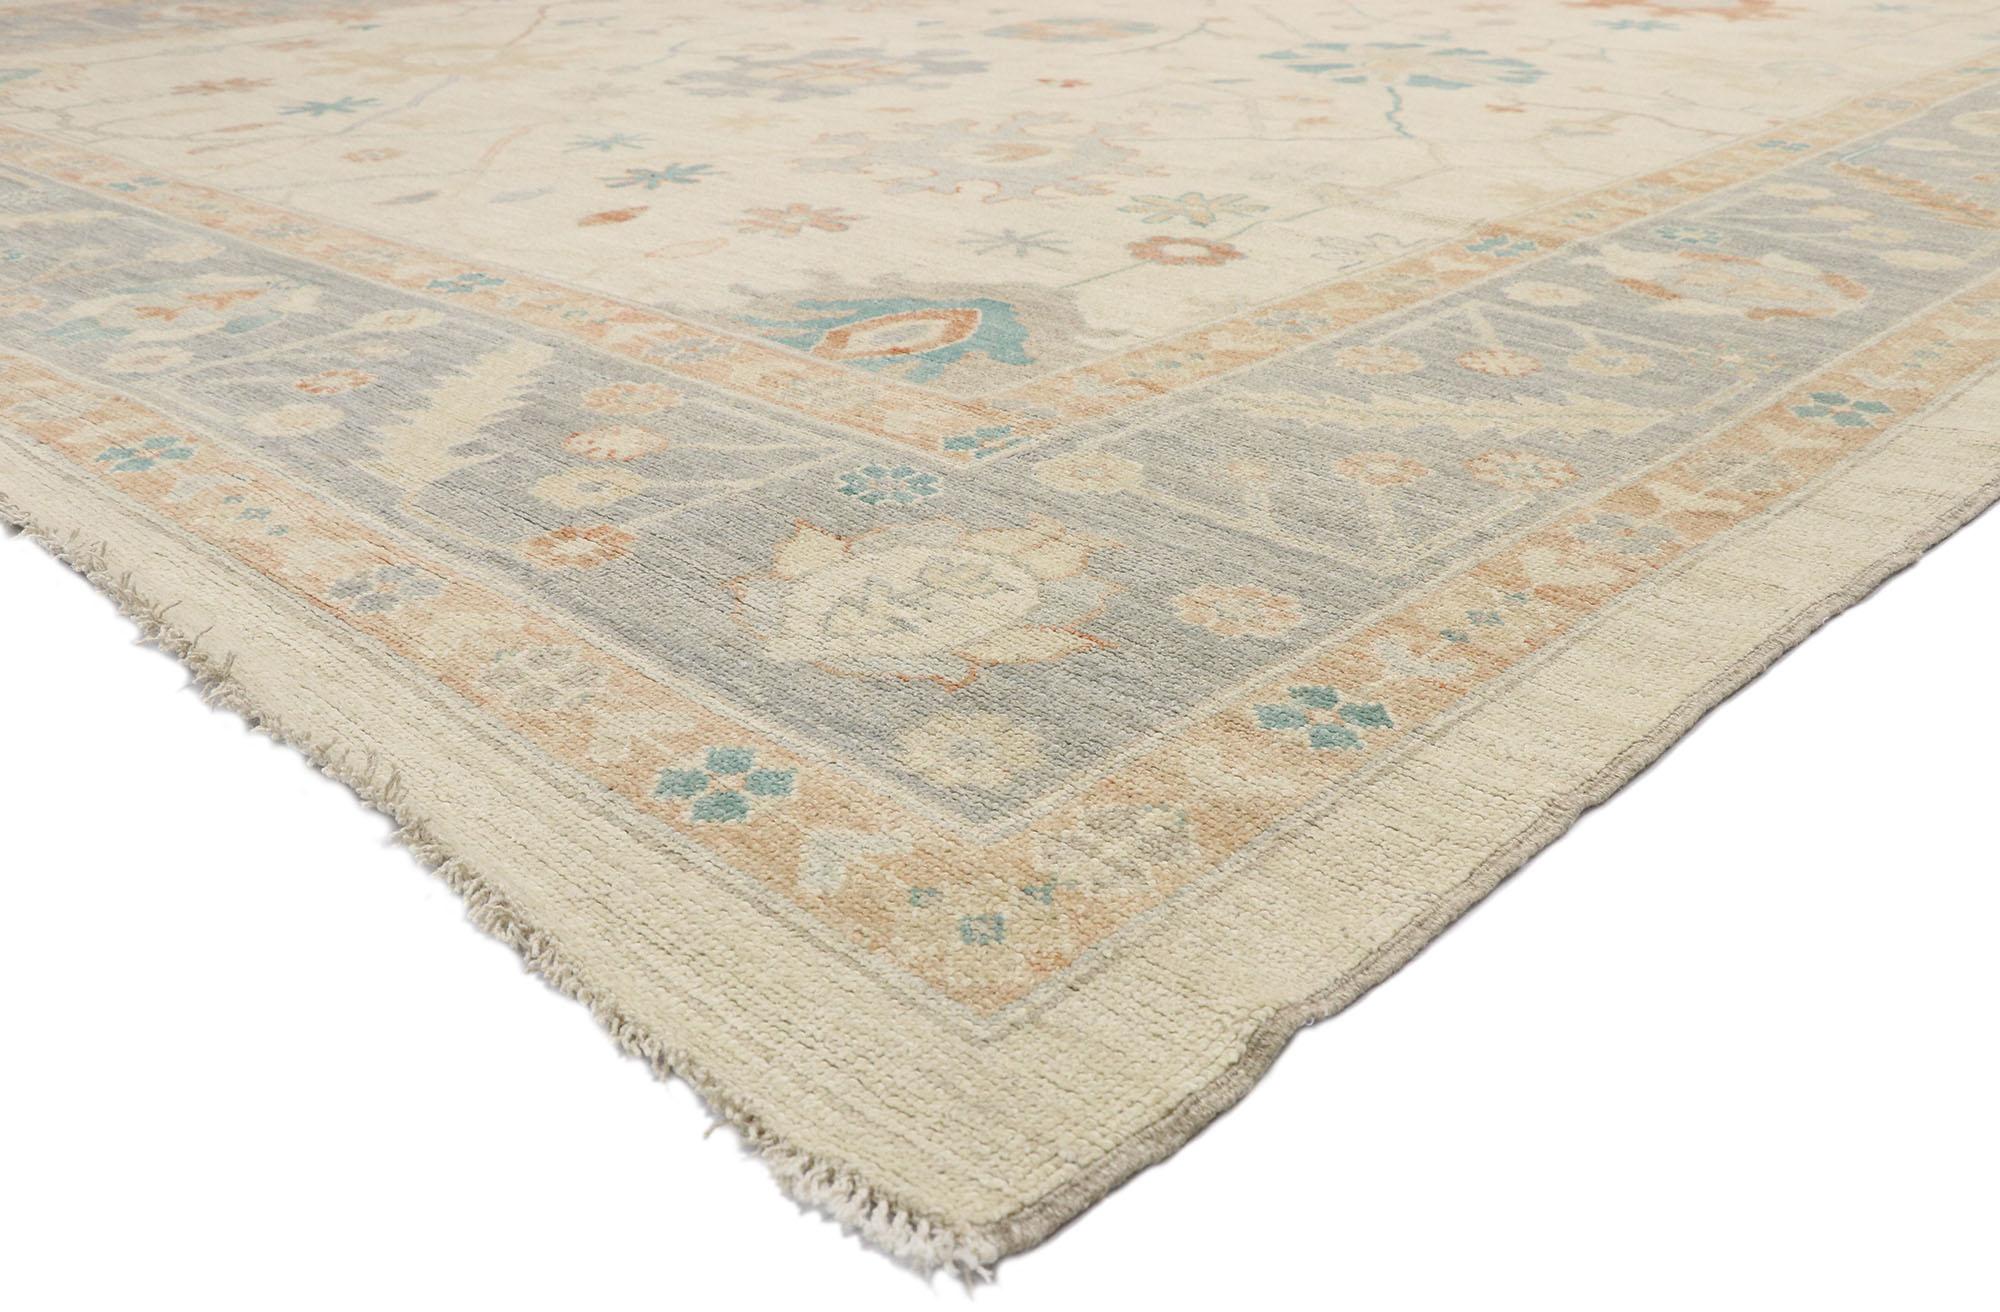 80557 New Soft Earth-Tone Oushak Rug, 12'00 x 15'00. With its light and airy colors combined with tranquil vibes, this hand-knotted wool Oushak transitional area rug creates an inimitable warmth and calming ambiance. It features an all-over